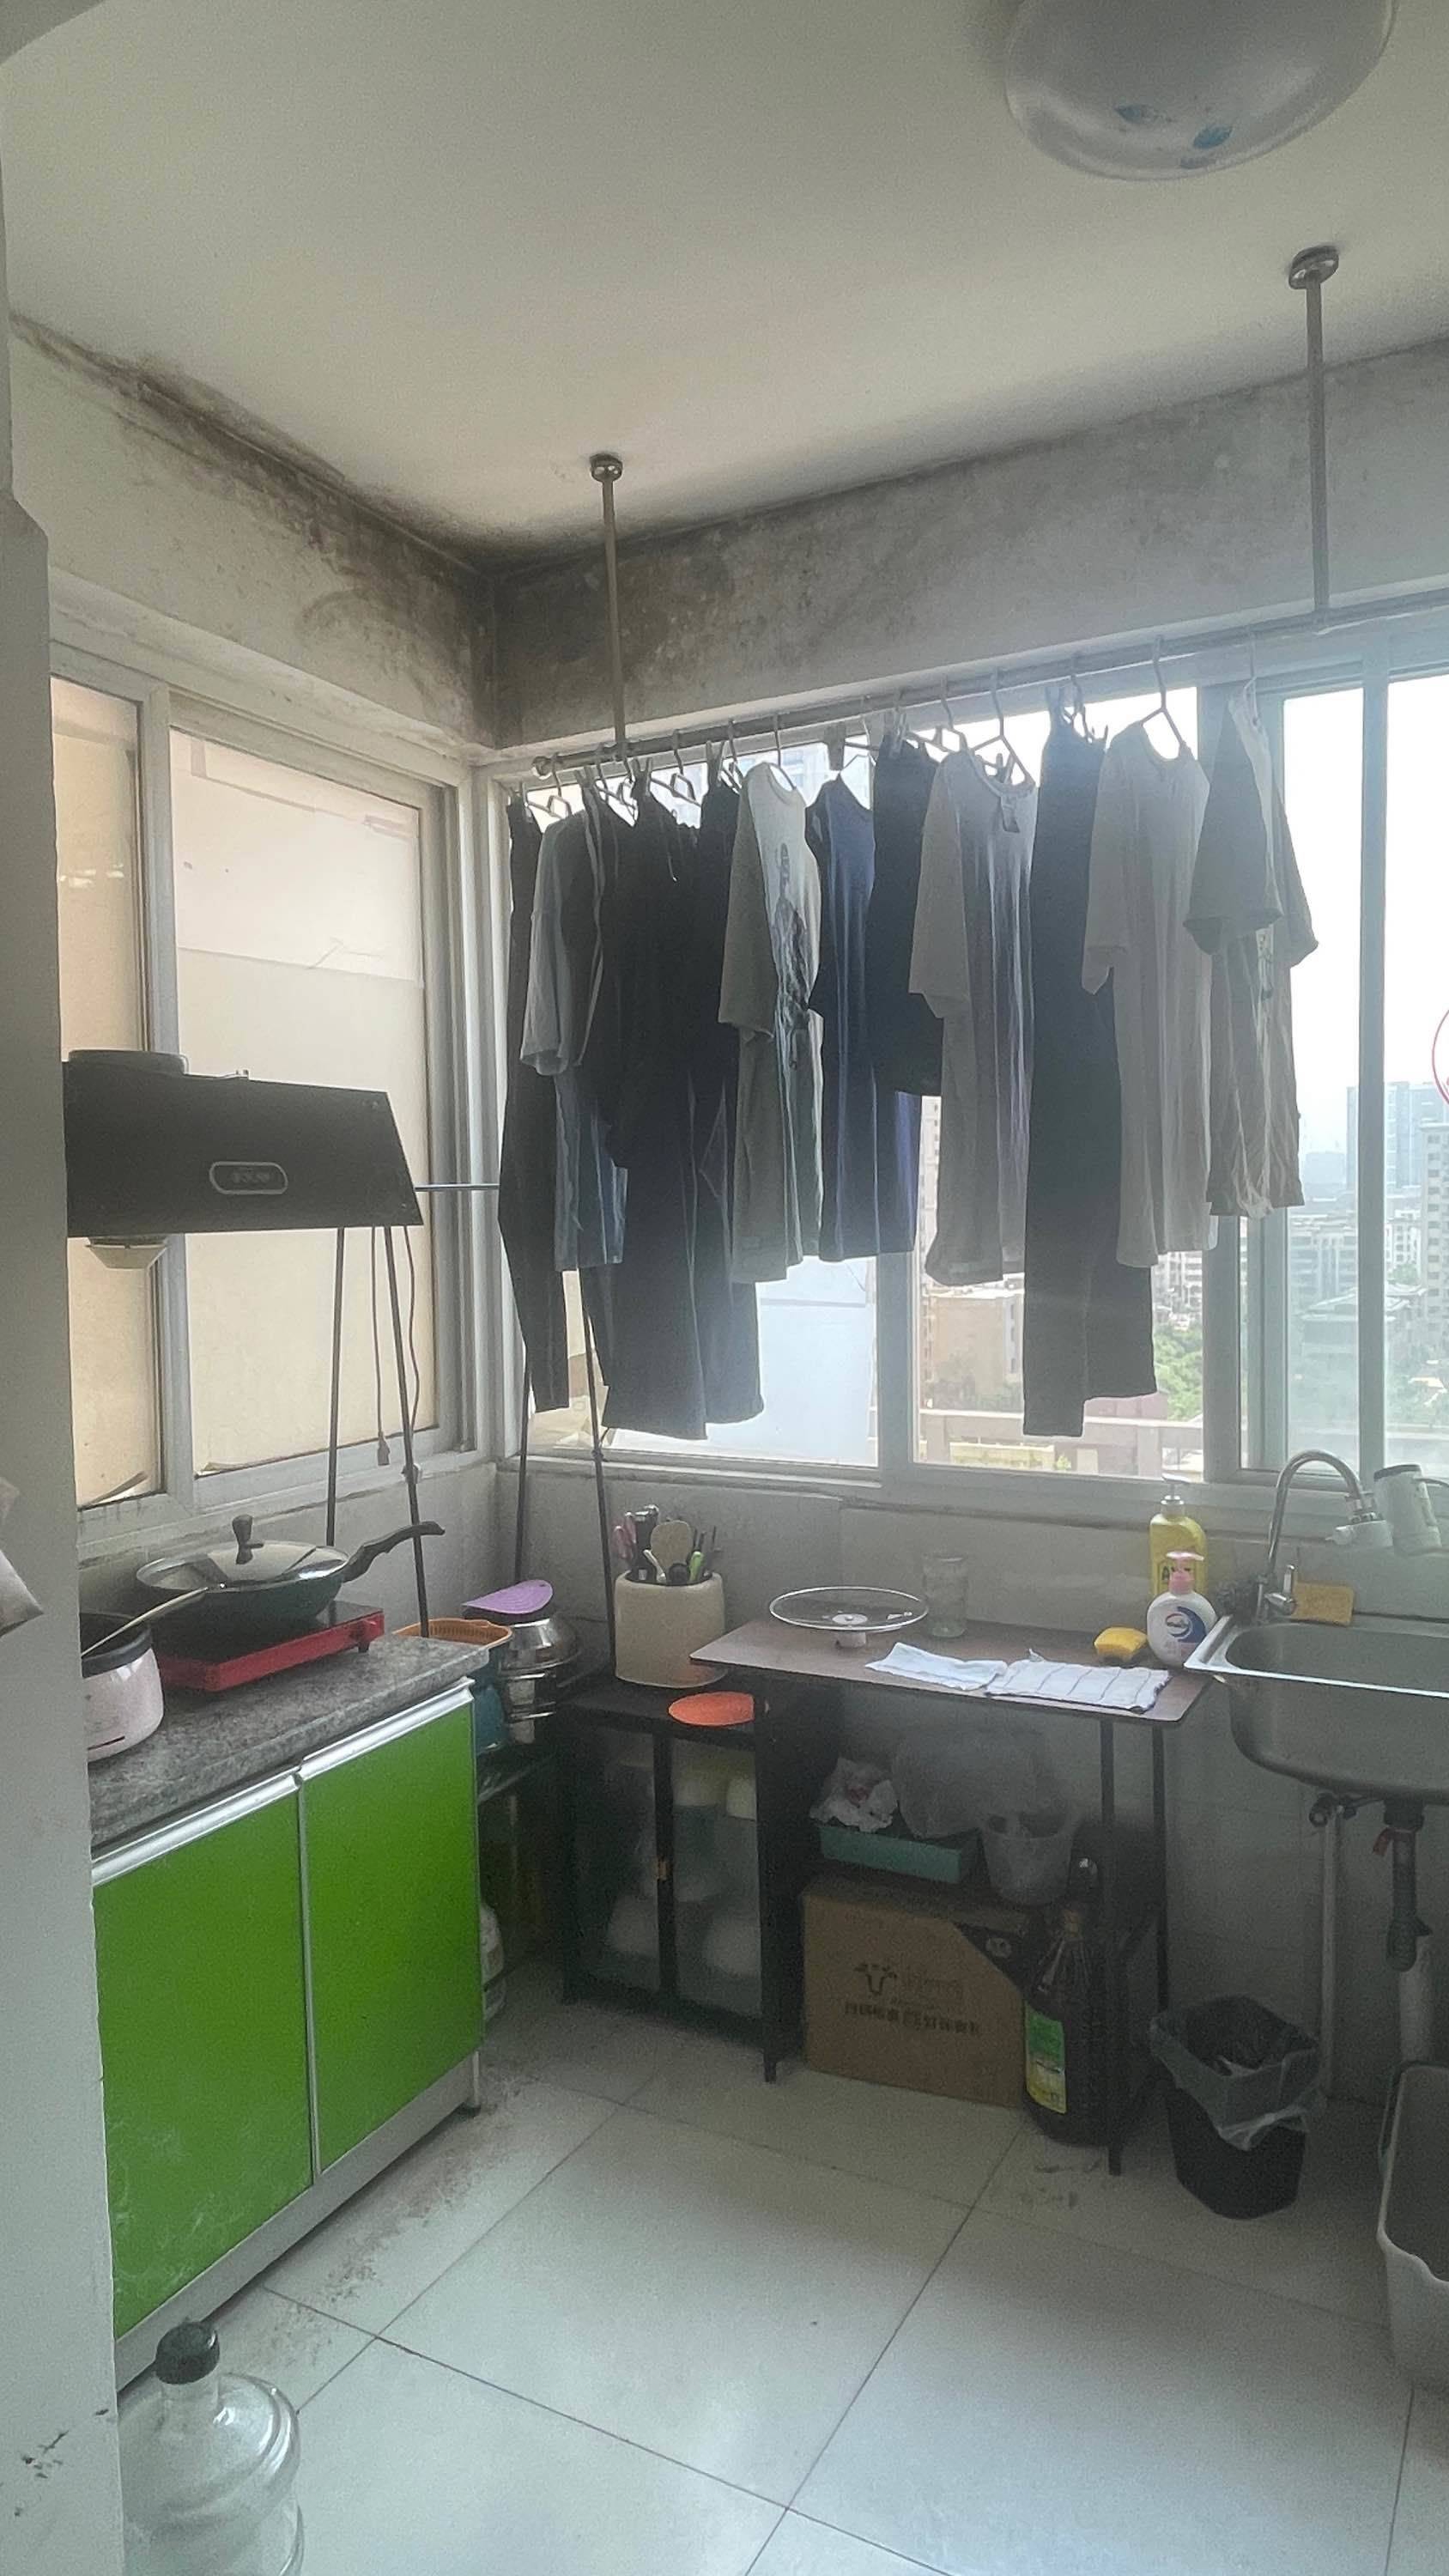 Xi'An-Weiyang-Cozy Home,Clean&Comfy,No Gender Limit,Hustle & Bustle,Pet Friendly